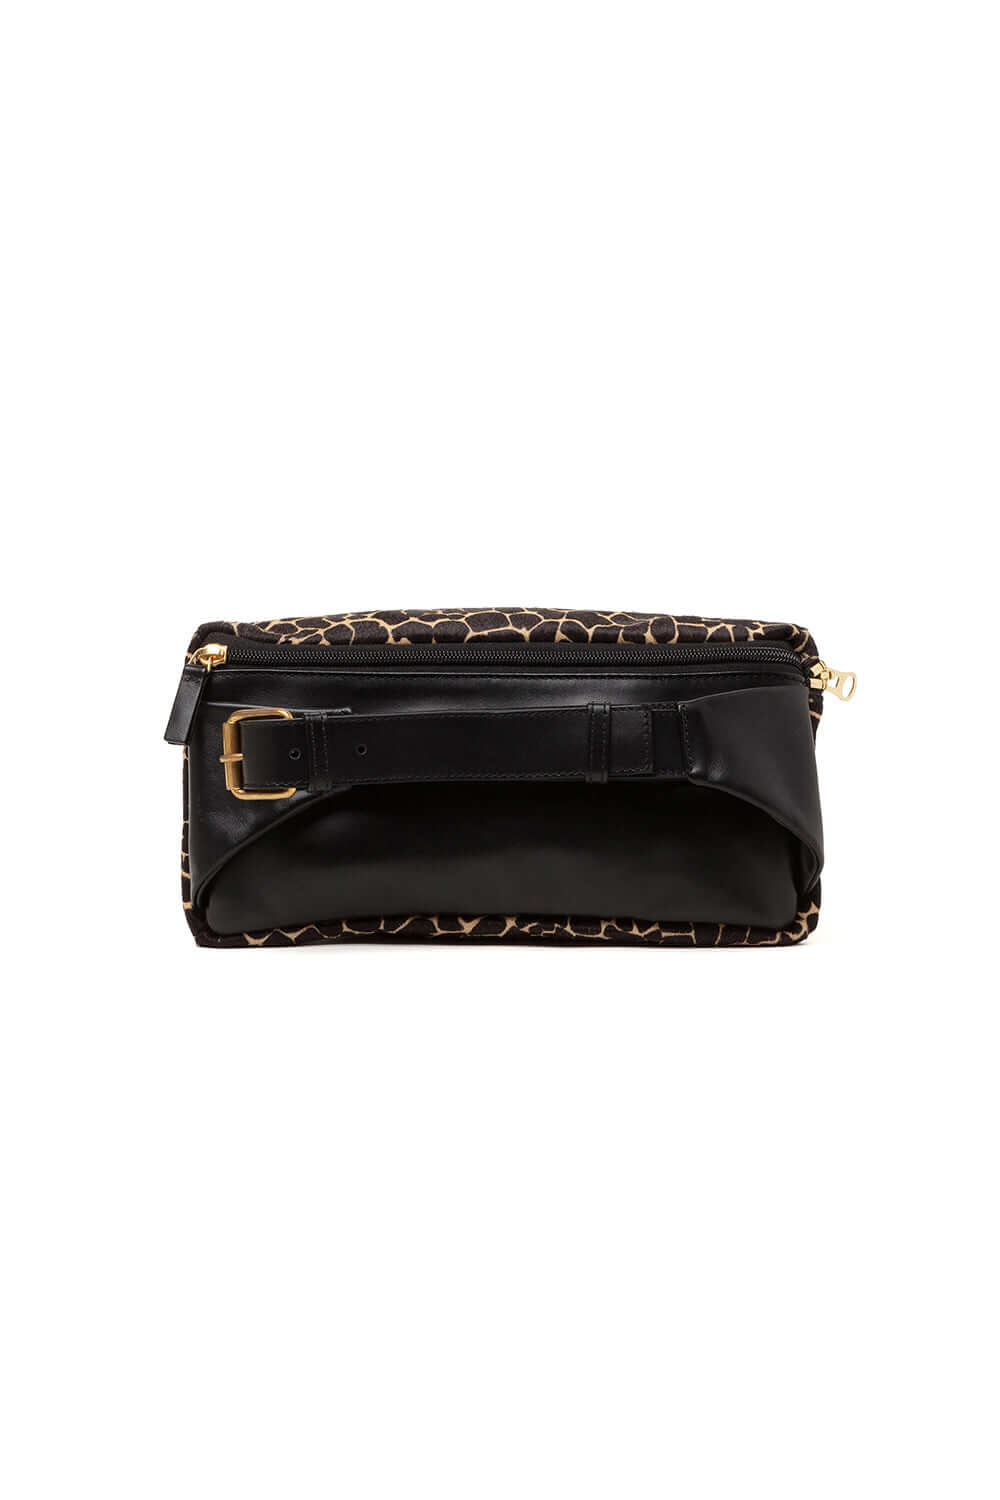 Fanny pack in giraffe printed leather